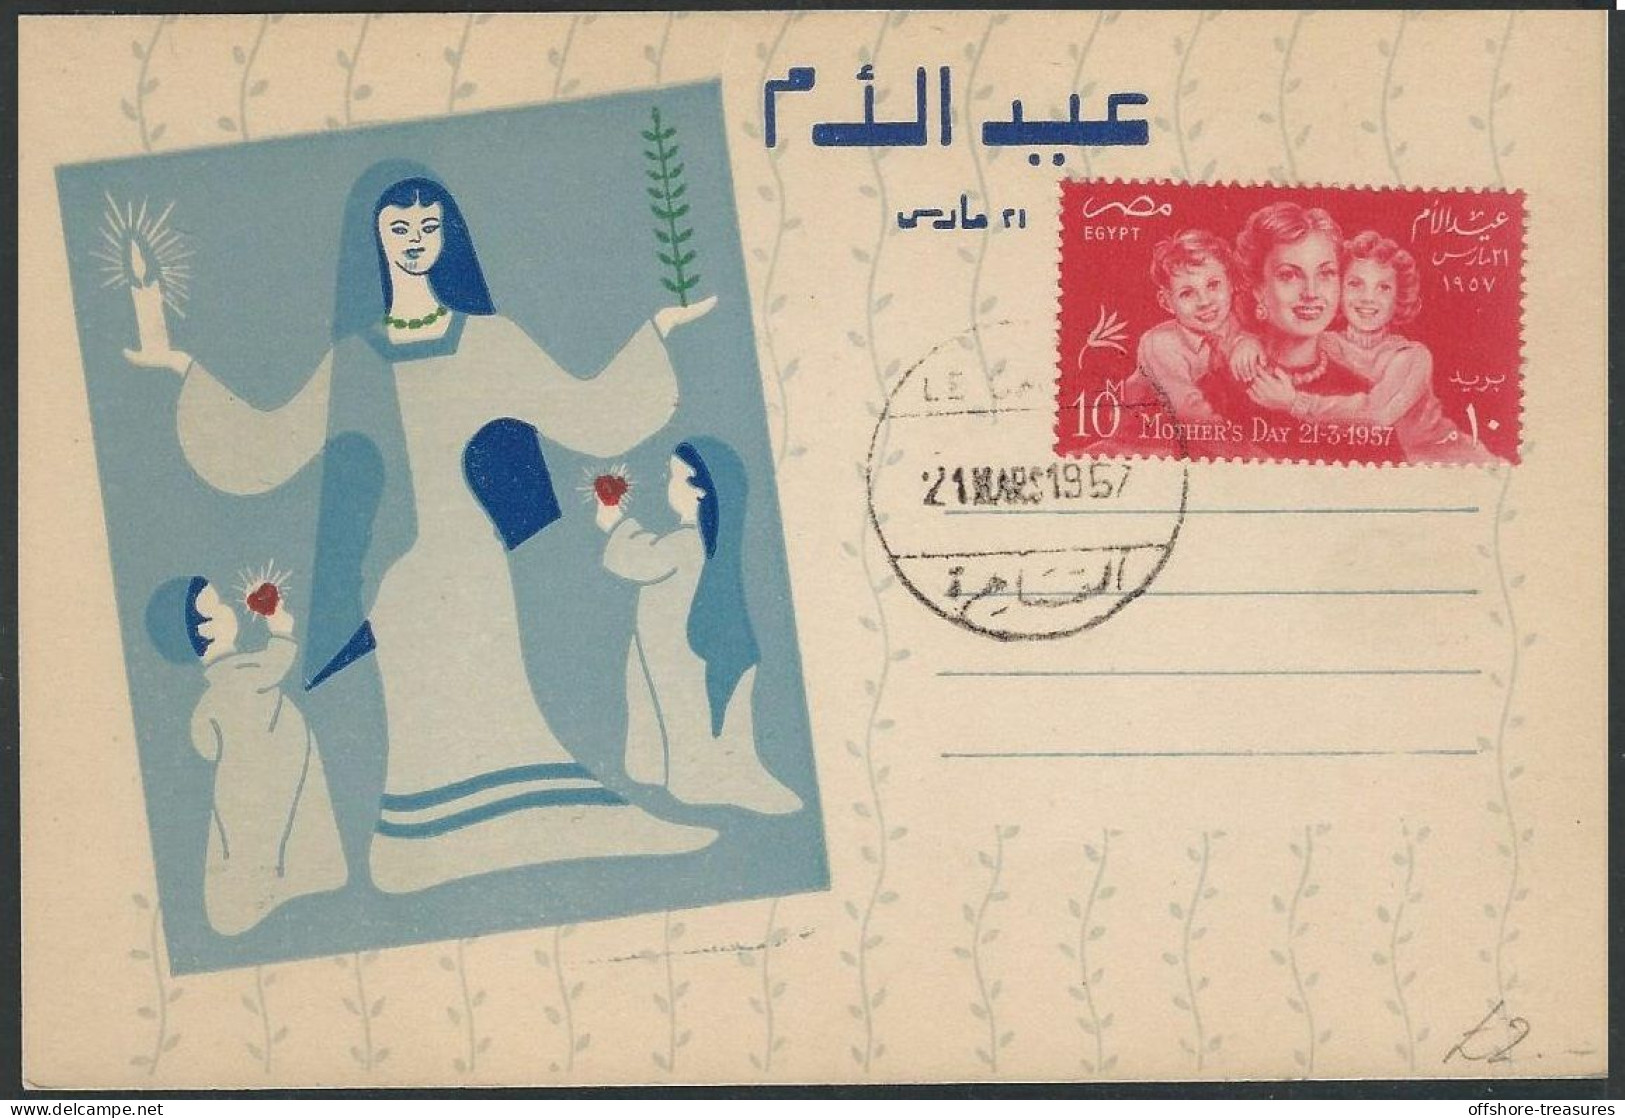 Egypt UAR 1957 First Day Cover - Postcard Mother Day - Irregular FDC / Post Card - Covers & Documents